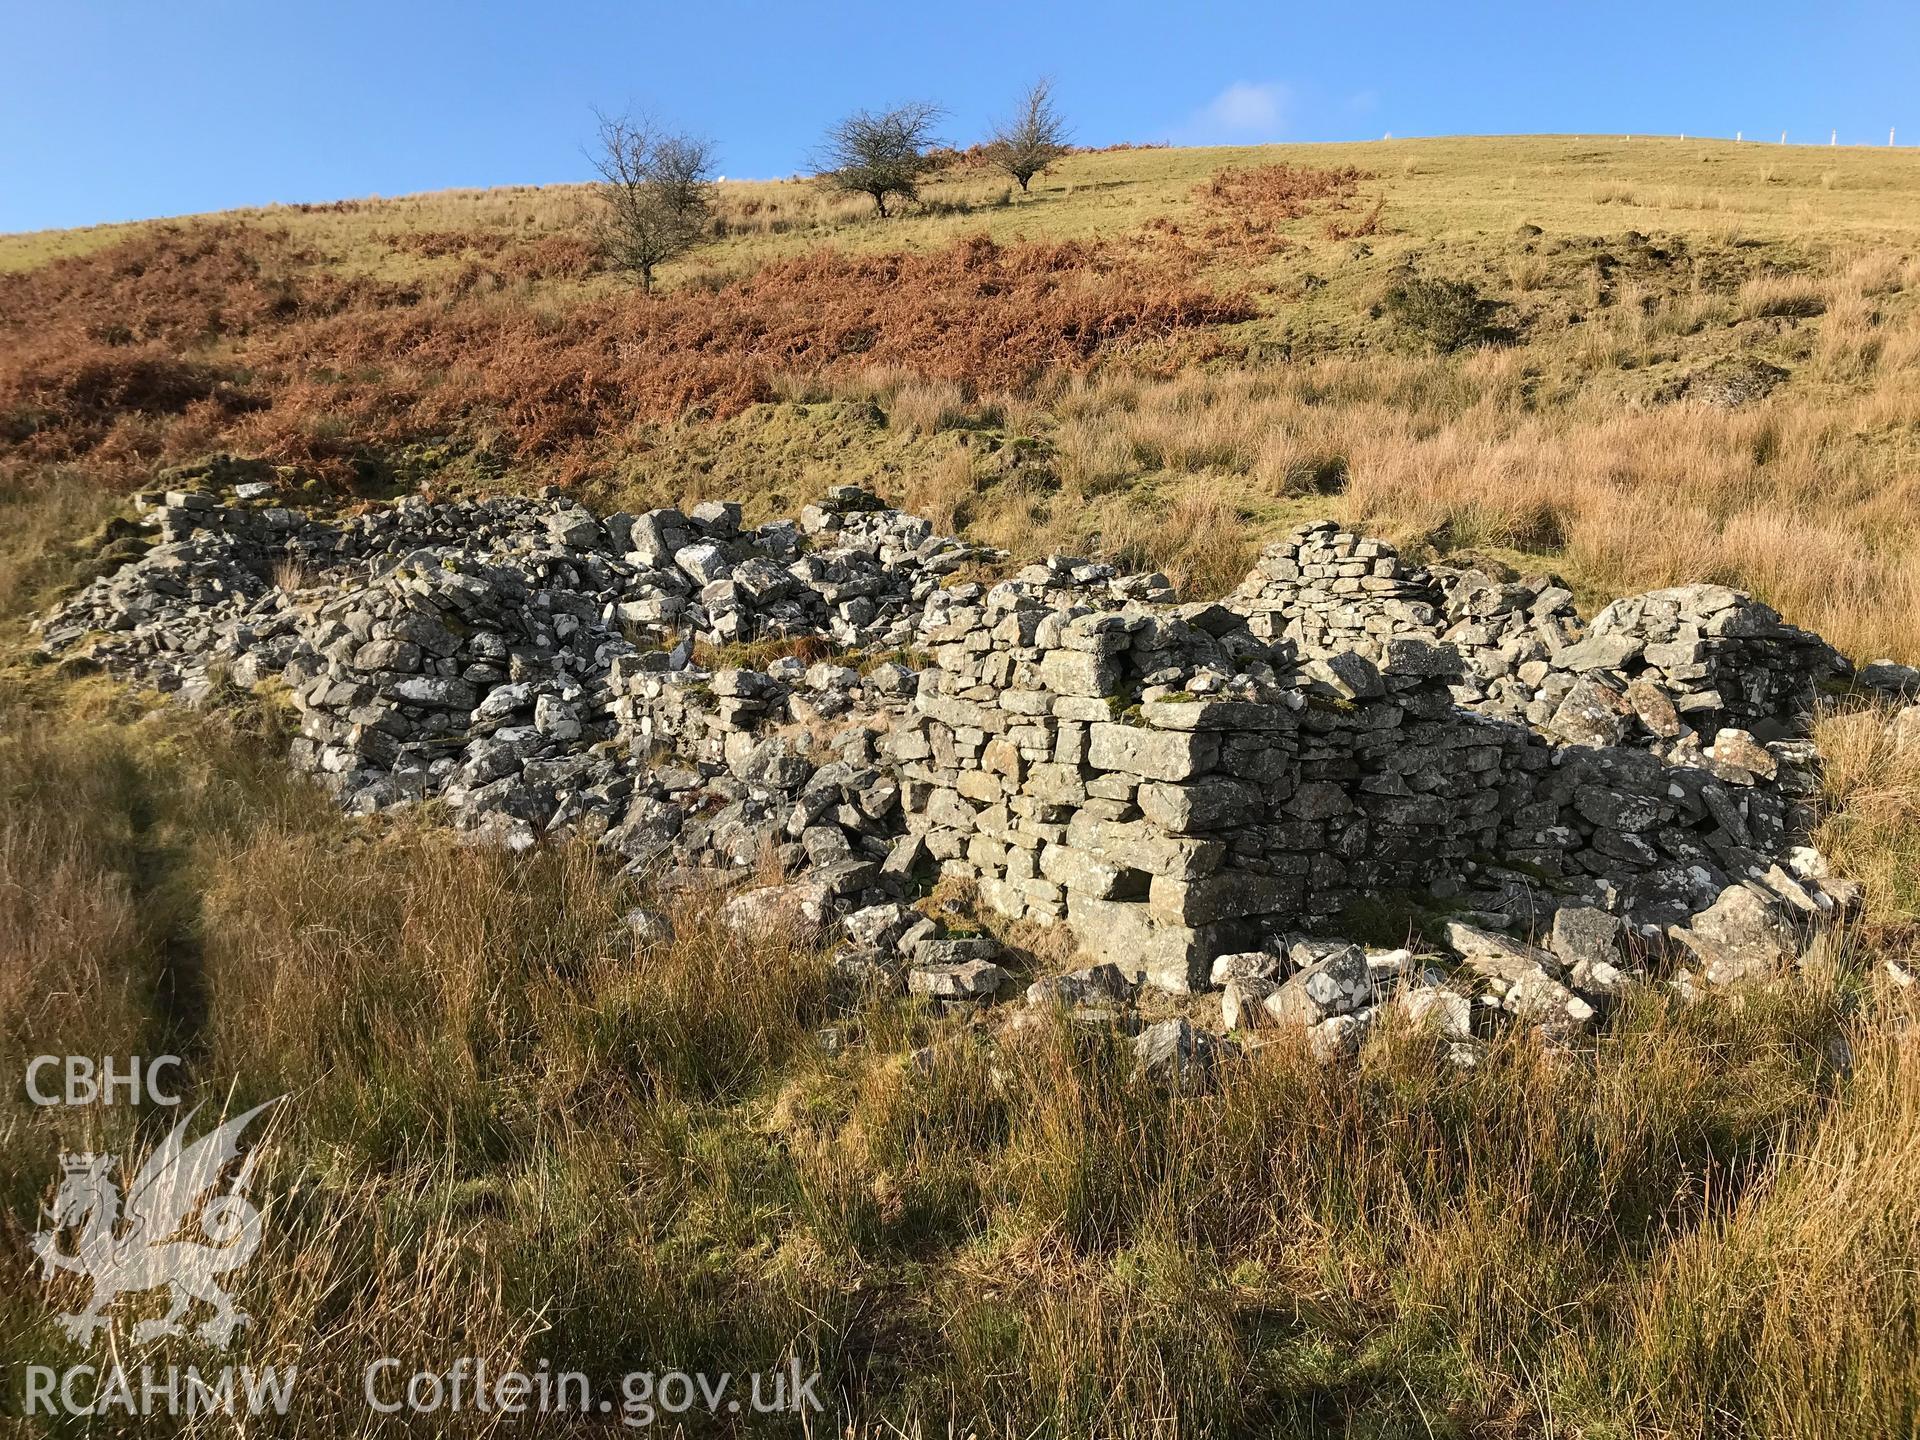 Detailed view of remains of drystone wall at Brithdir deserted settlement, Llanddewi Brefi. Colour photograph taken by Paul R. Davis on 17th November 2018.